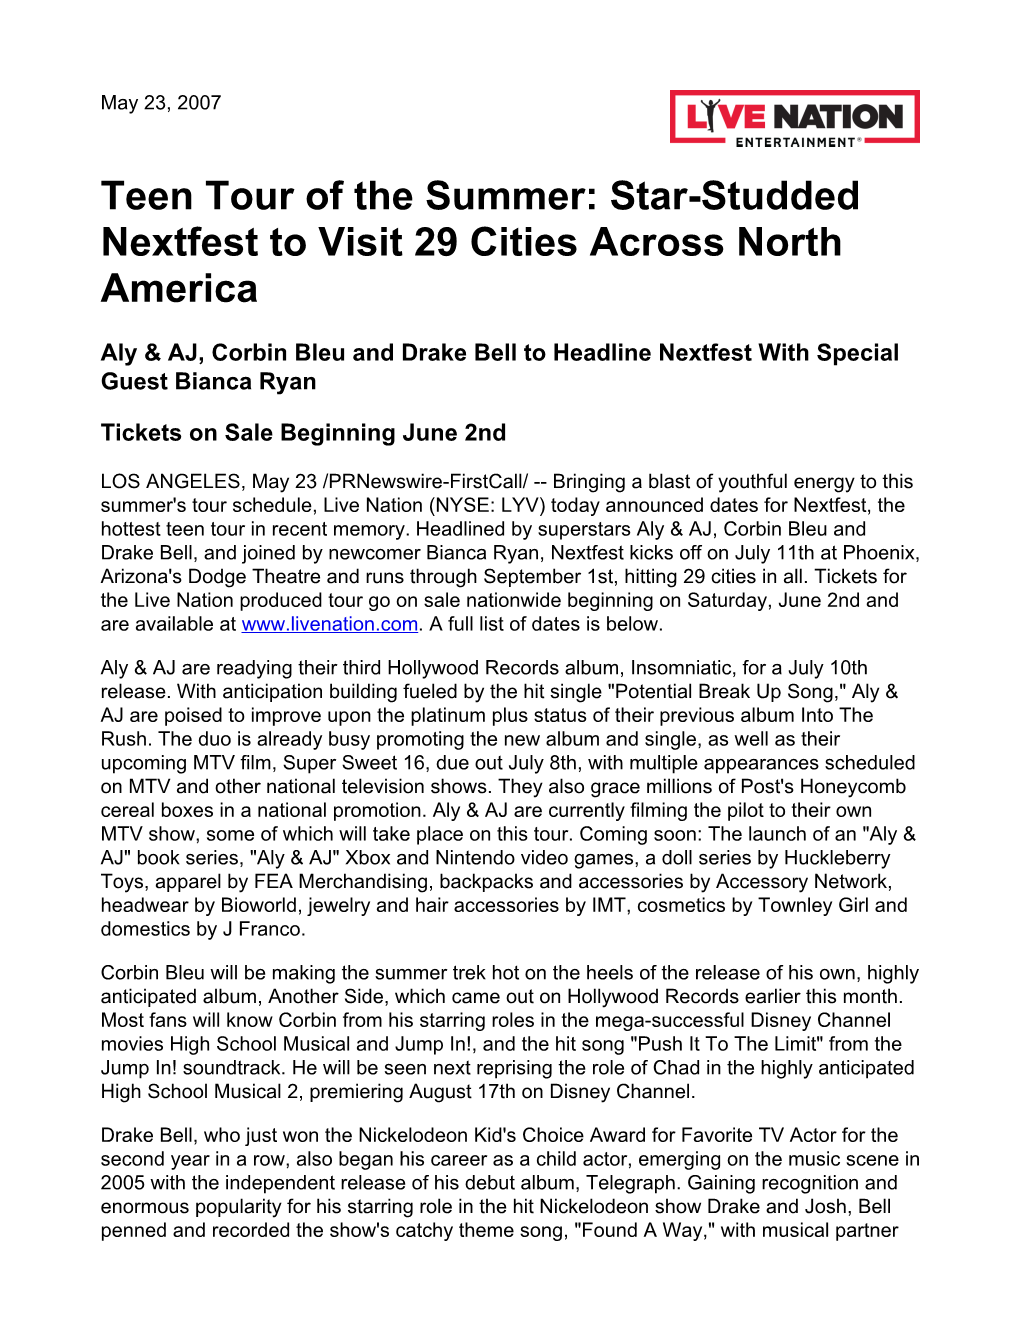 Teen Tour of the Summer: Star-Studded Nextfest to Visit 29 Cities Across North America